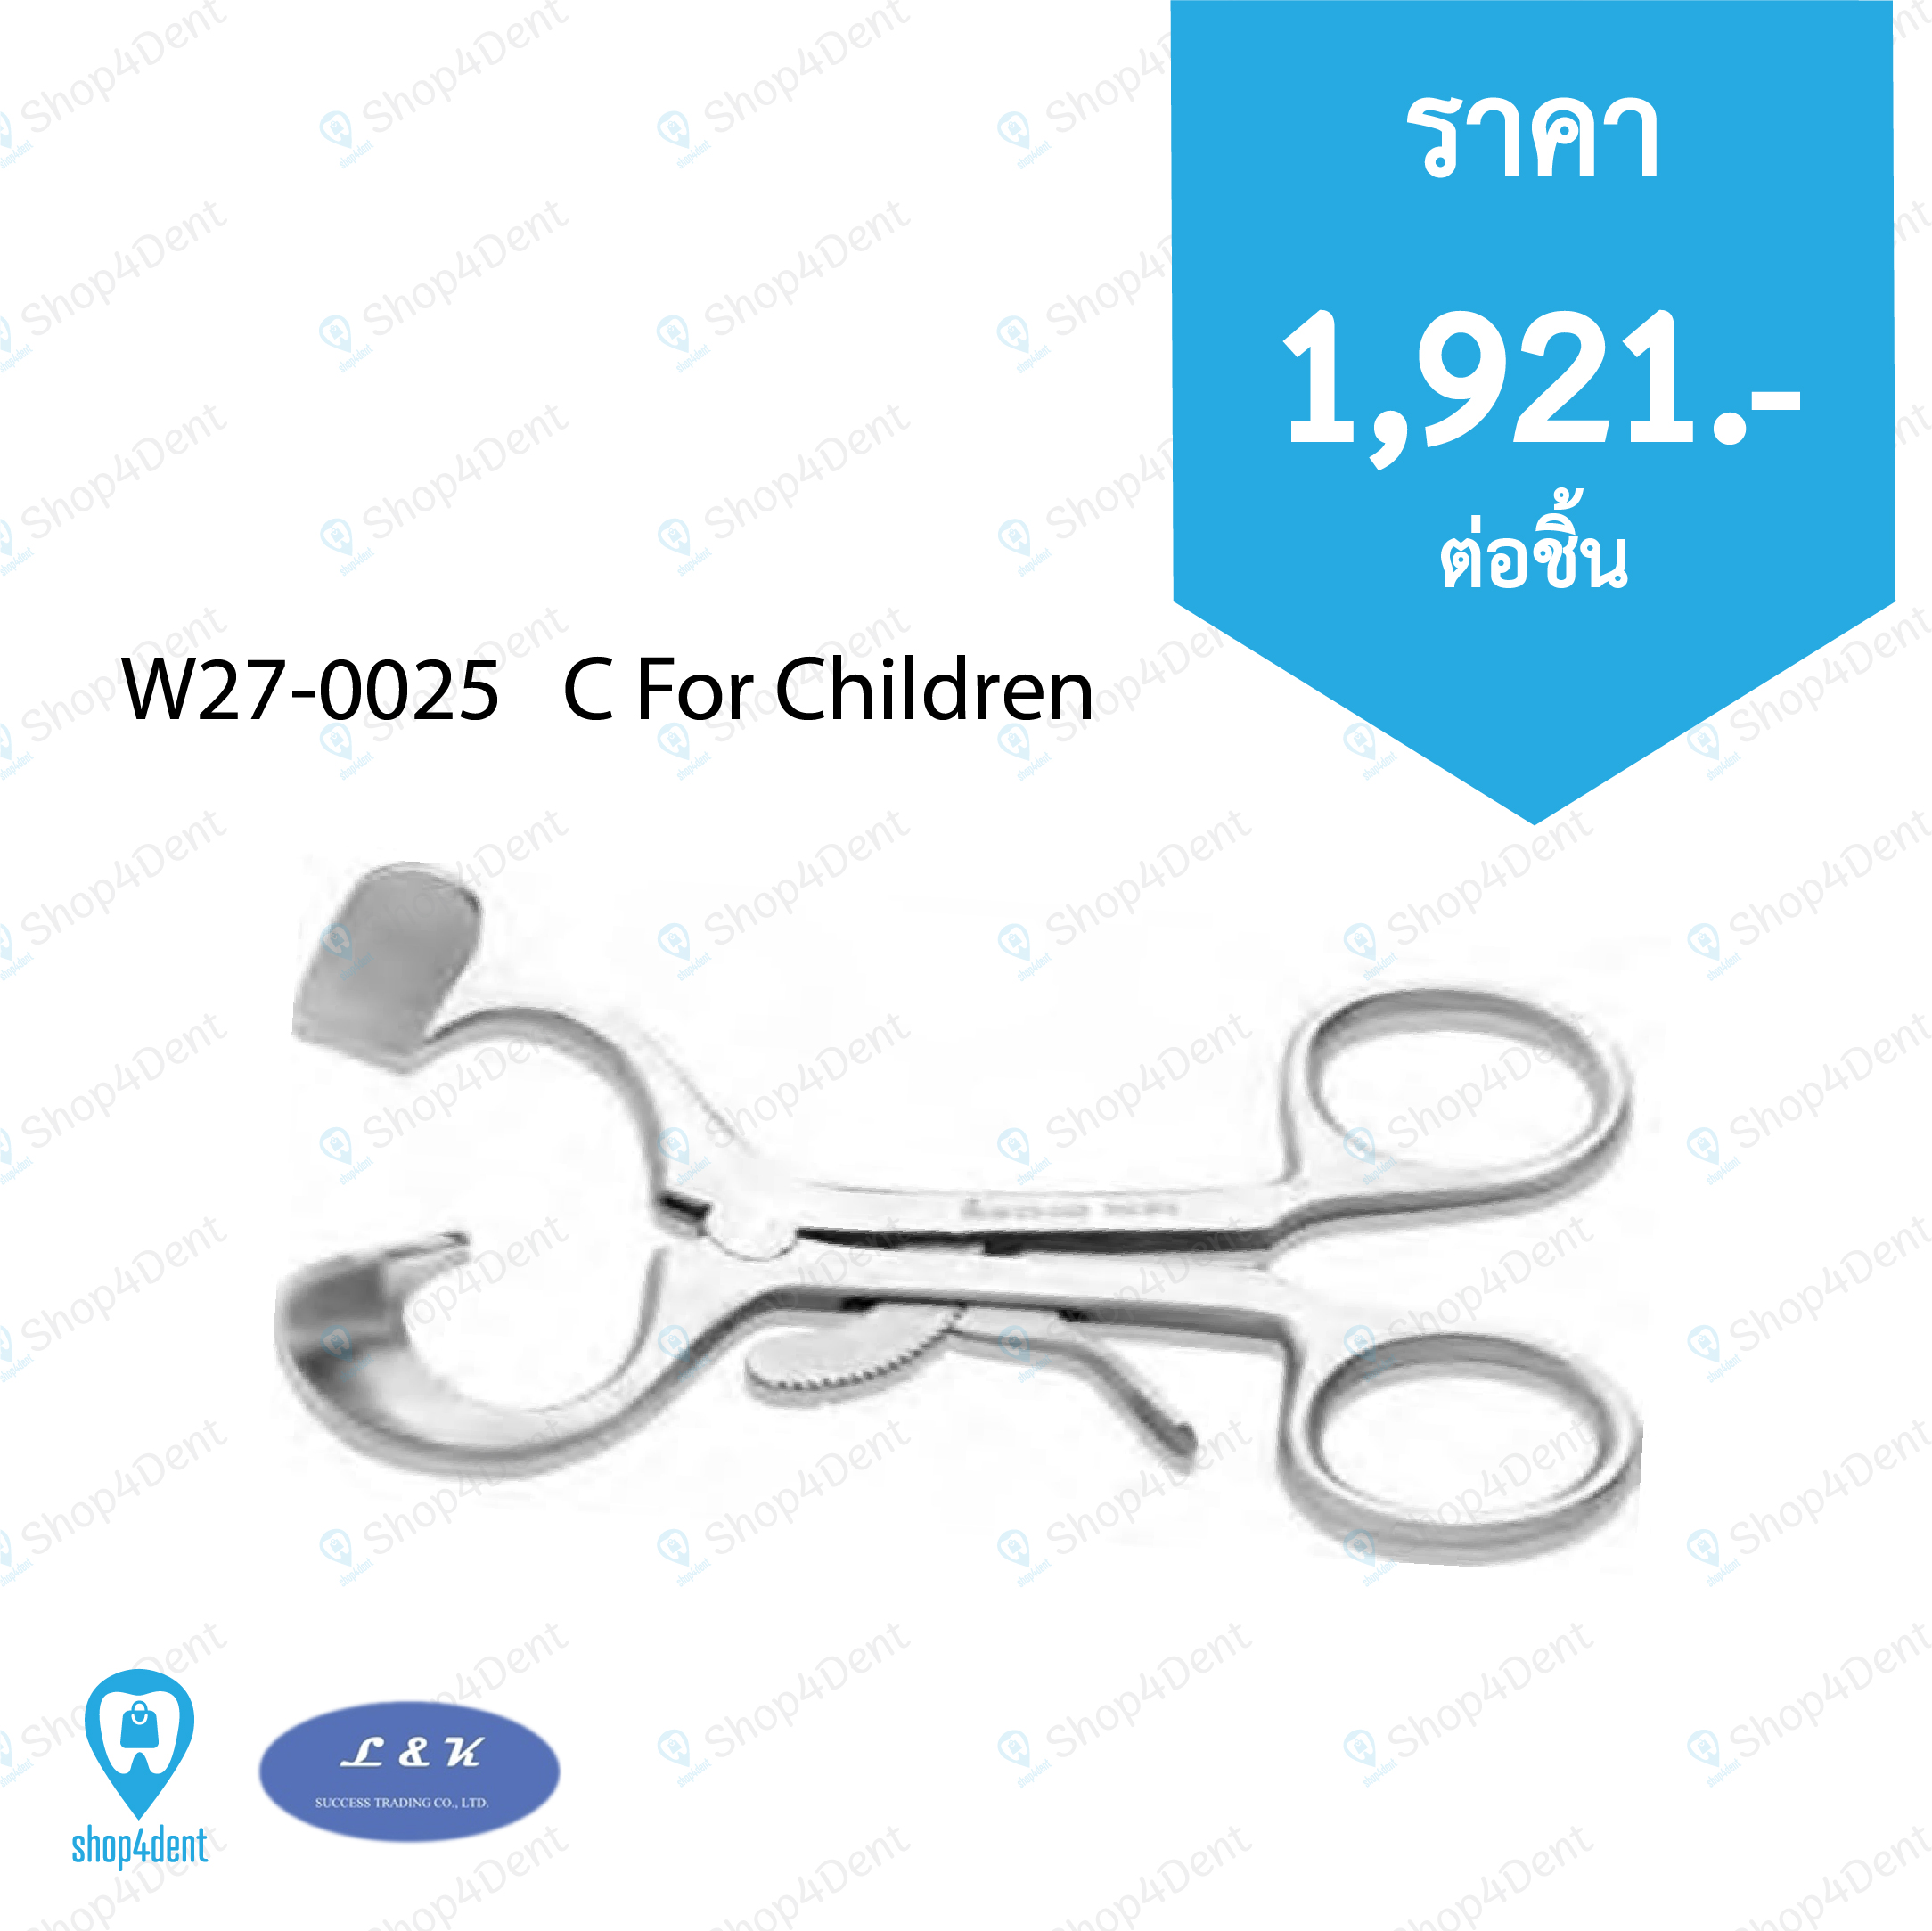 Mouth Gag_W27-0025   C For Children